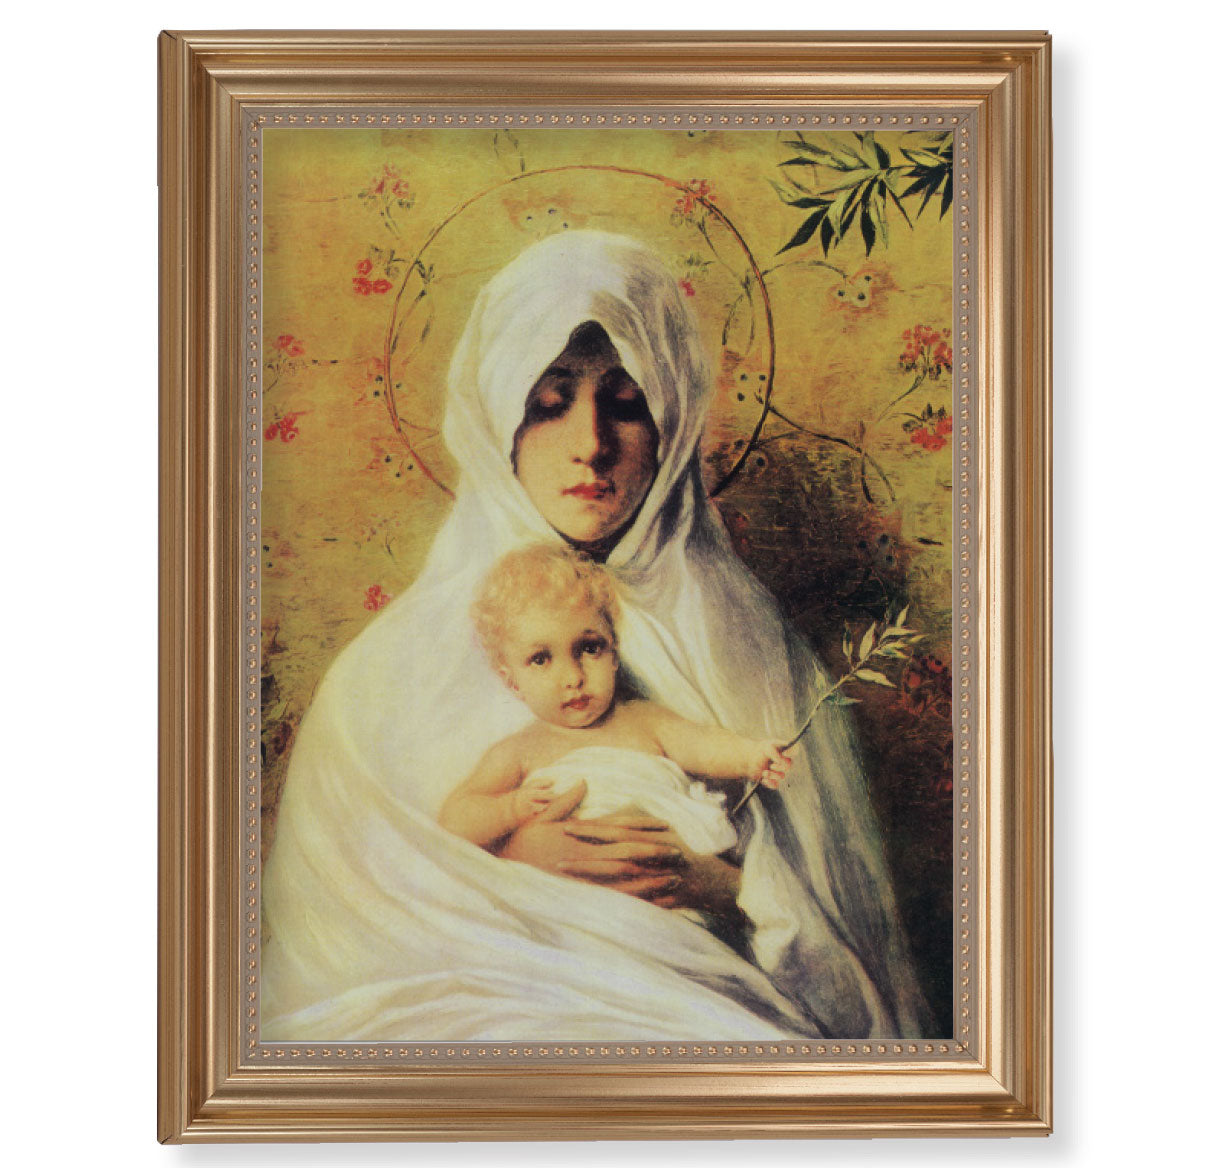 Our Lady of the Palm Gold Framed Art